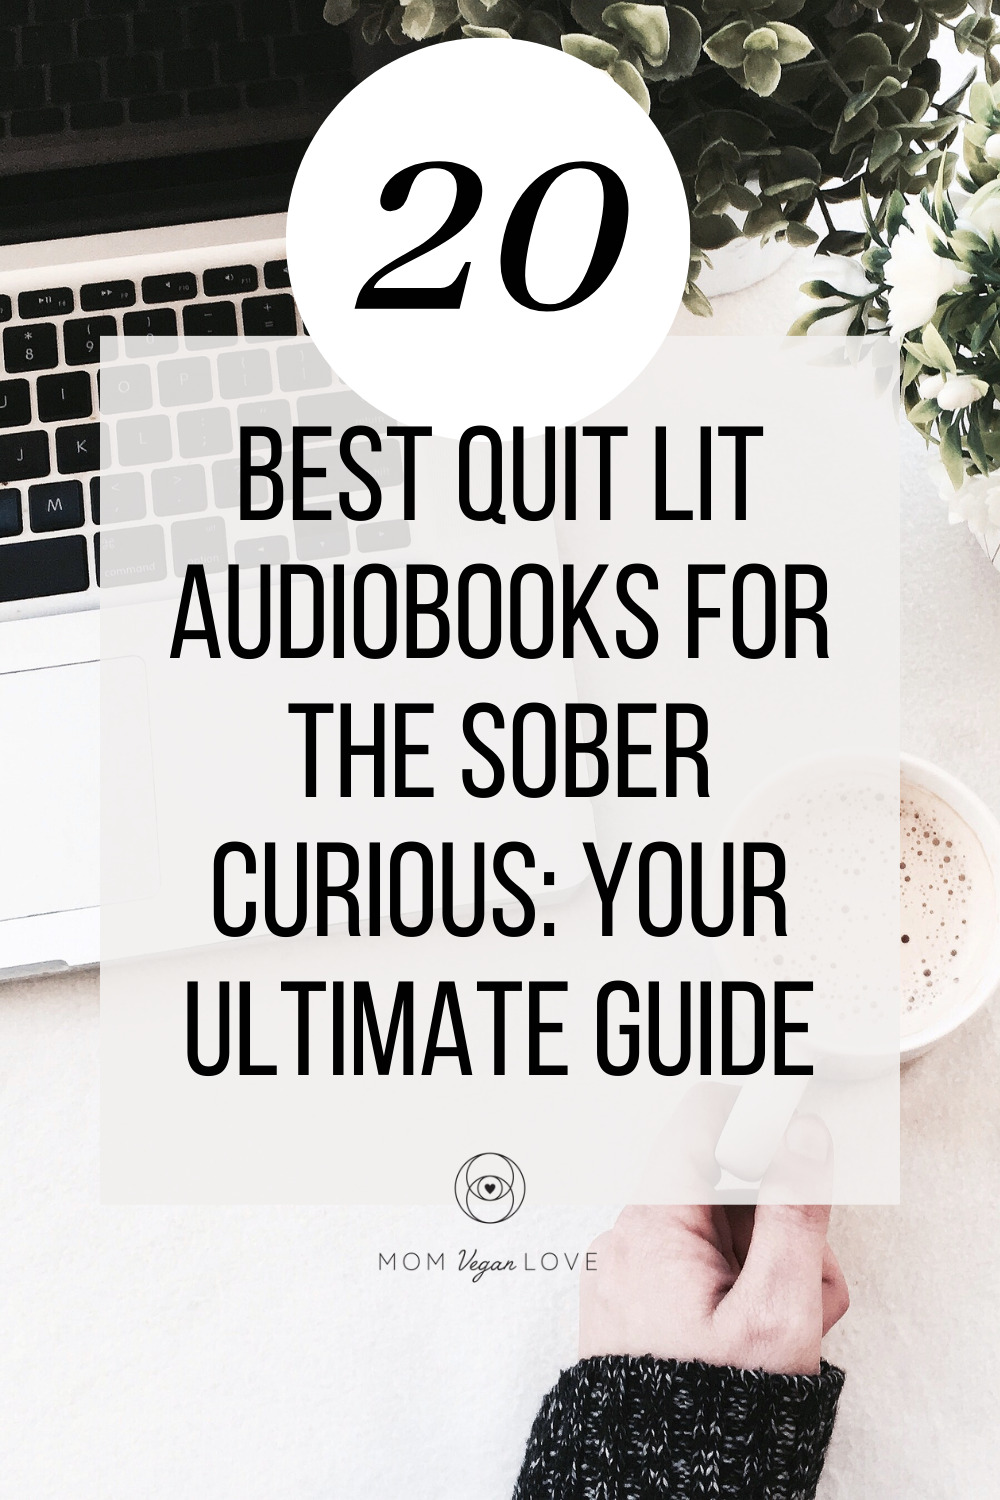 Top 20 Best Quit Lit Audiobooks for the Sober Curious Your Ultimate